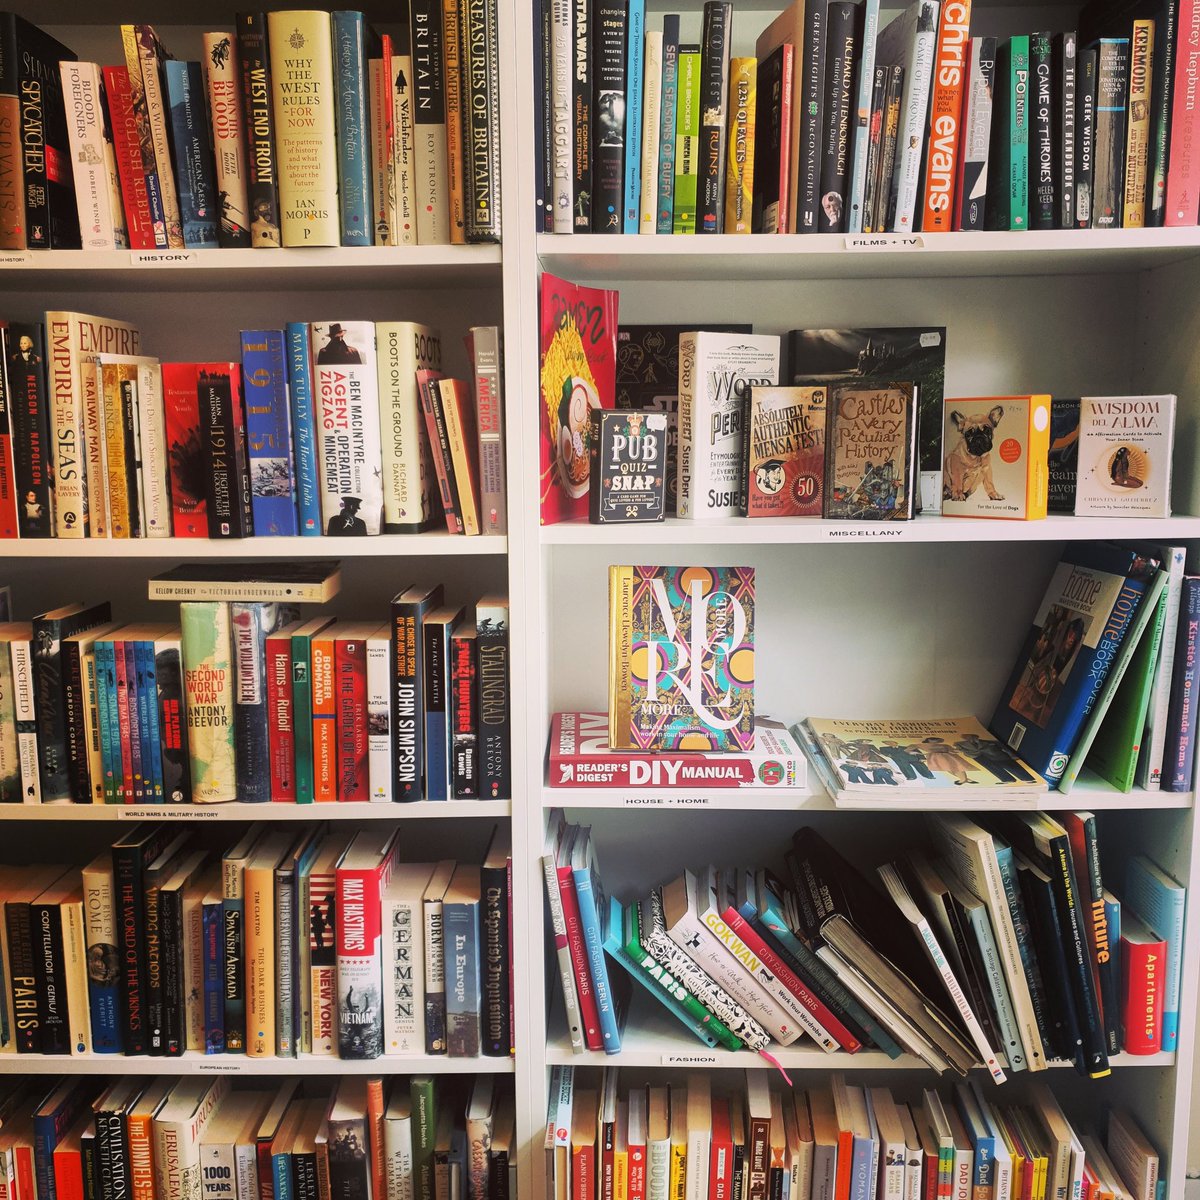 Our donations are officially open again 🥳🥳 Help us restock our shelves by donating all the old books on your shelves (and make some space for new ones in the process 😉) We are open every day from 10 - 4 and happy to take donations of any size! 🥰